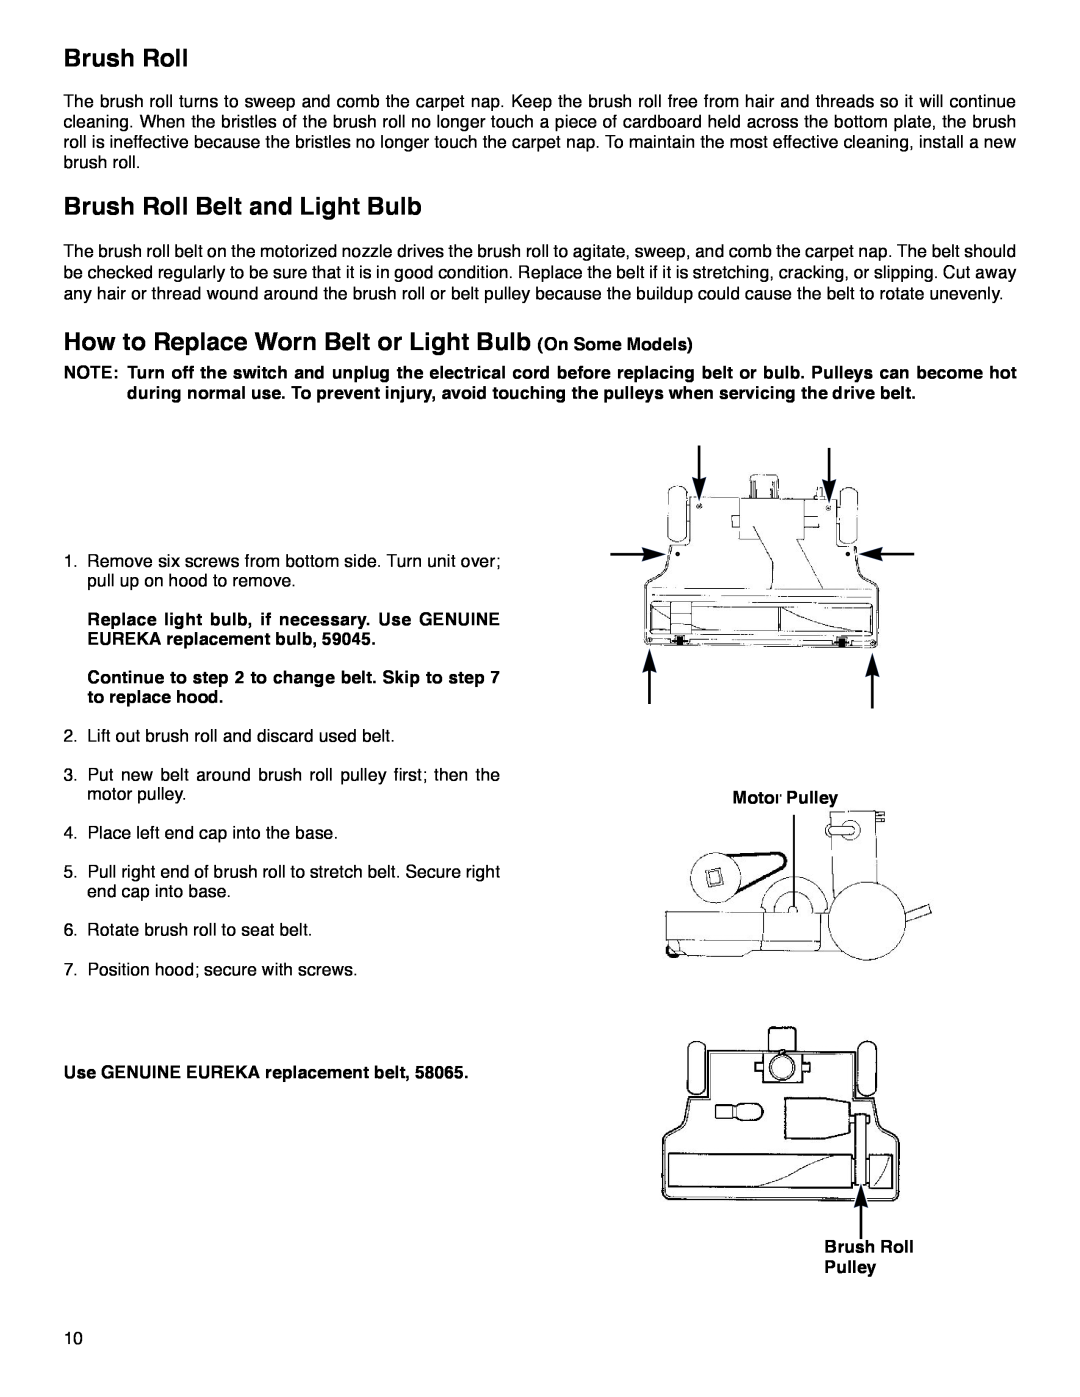 Eureka 6850 SERIES Brush Roll Belt and Light Bulb, How to Replace Worn Belt or Light Bulb On Some Models, Motor Pulley 